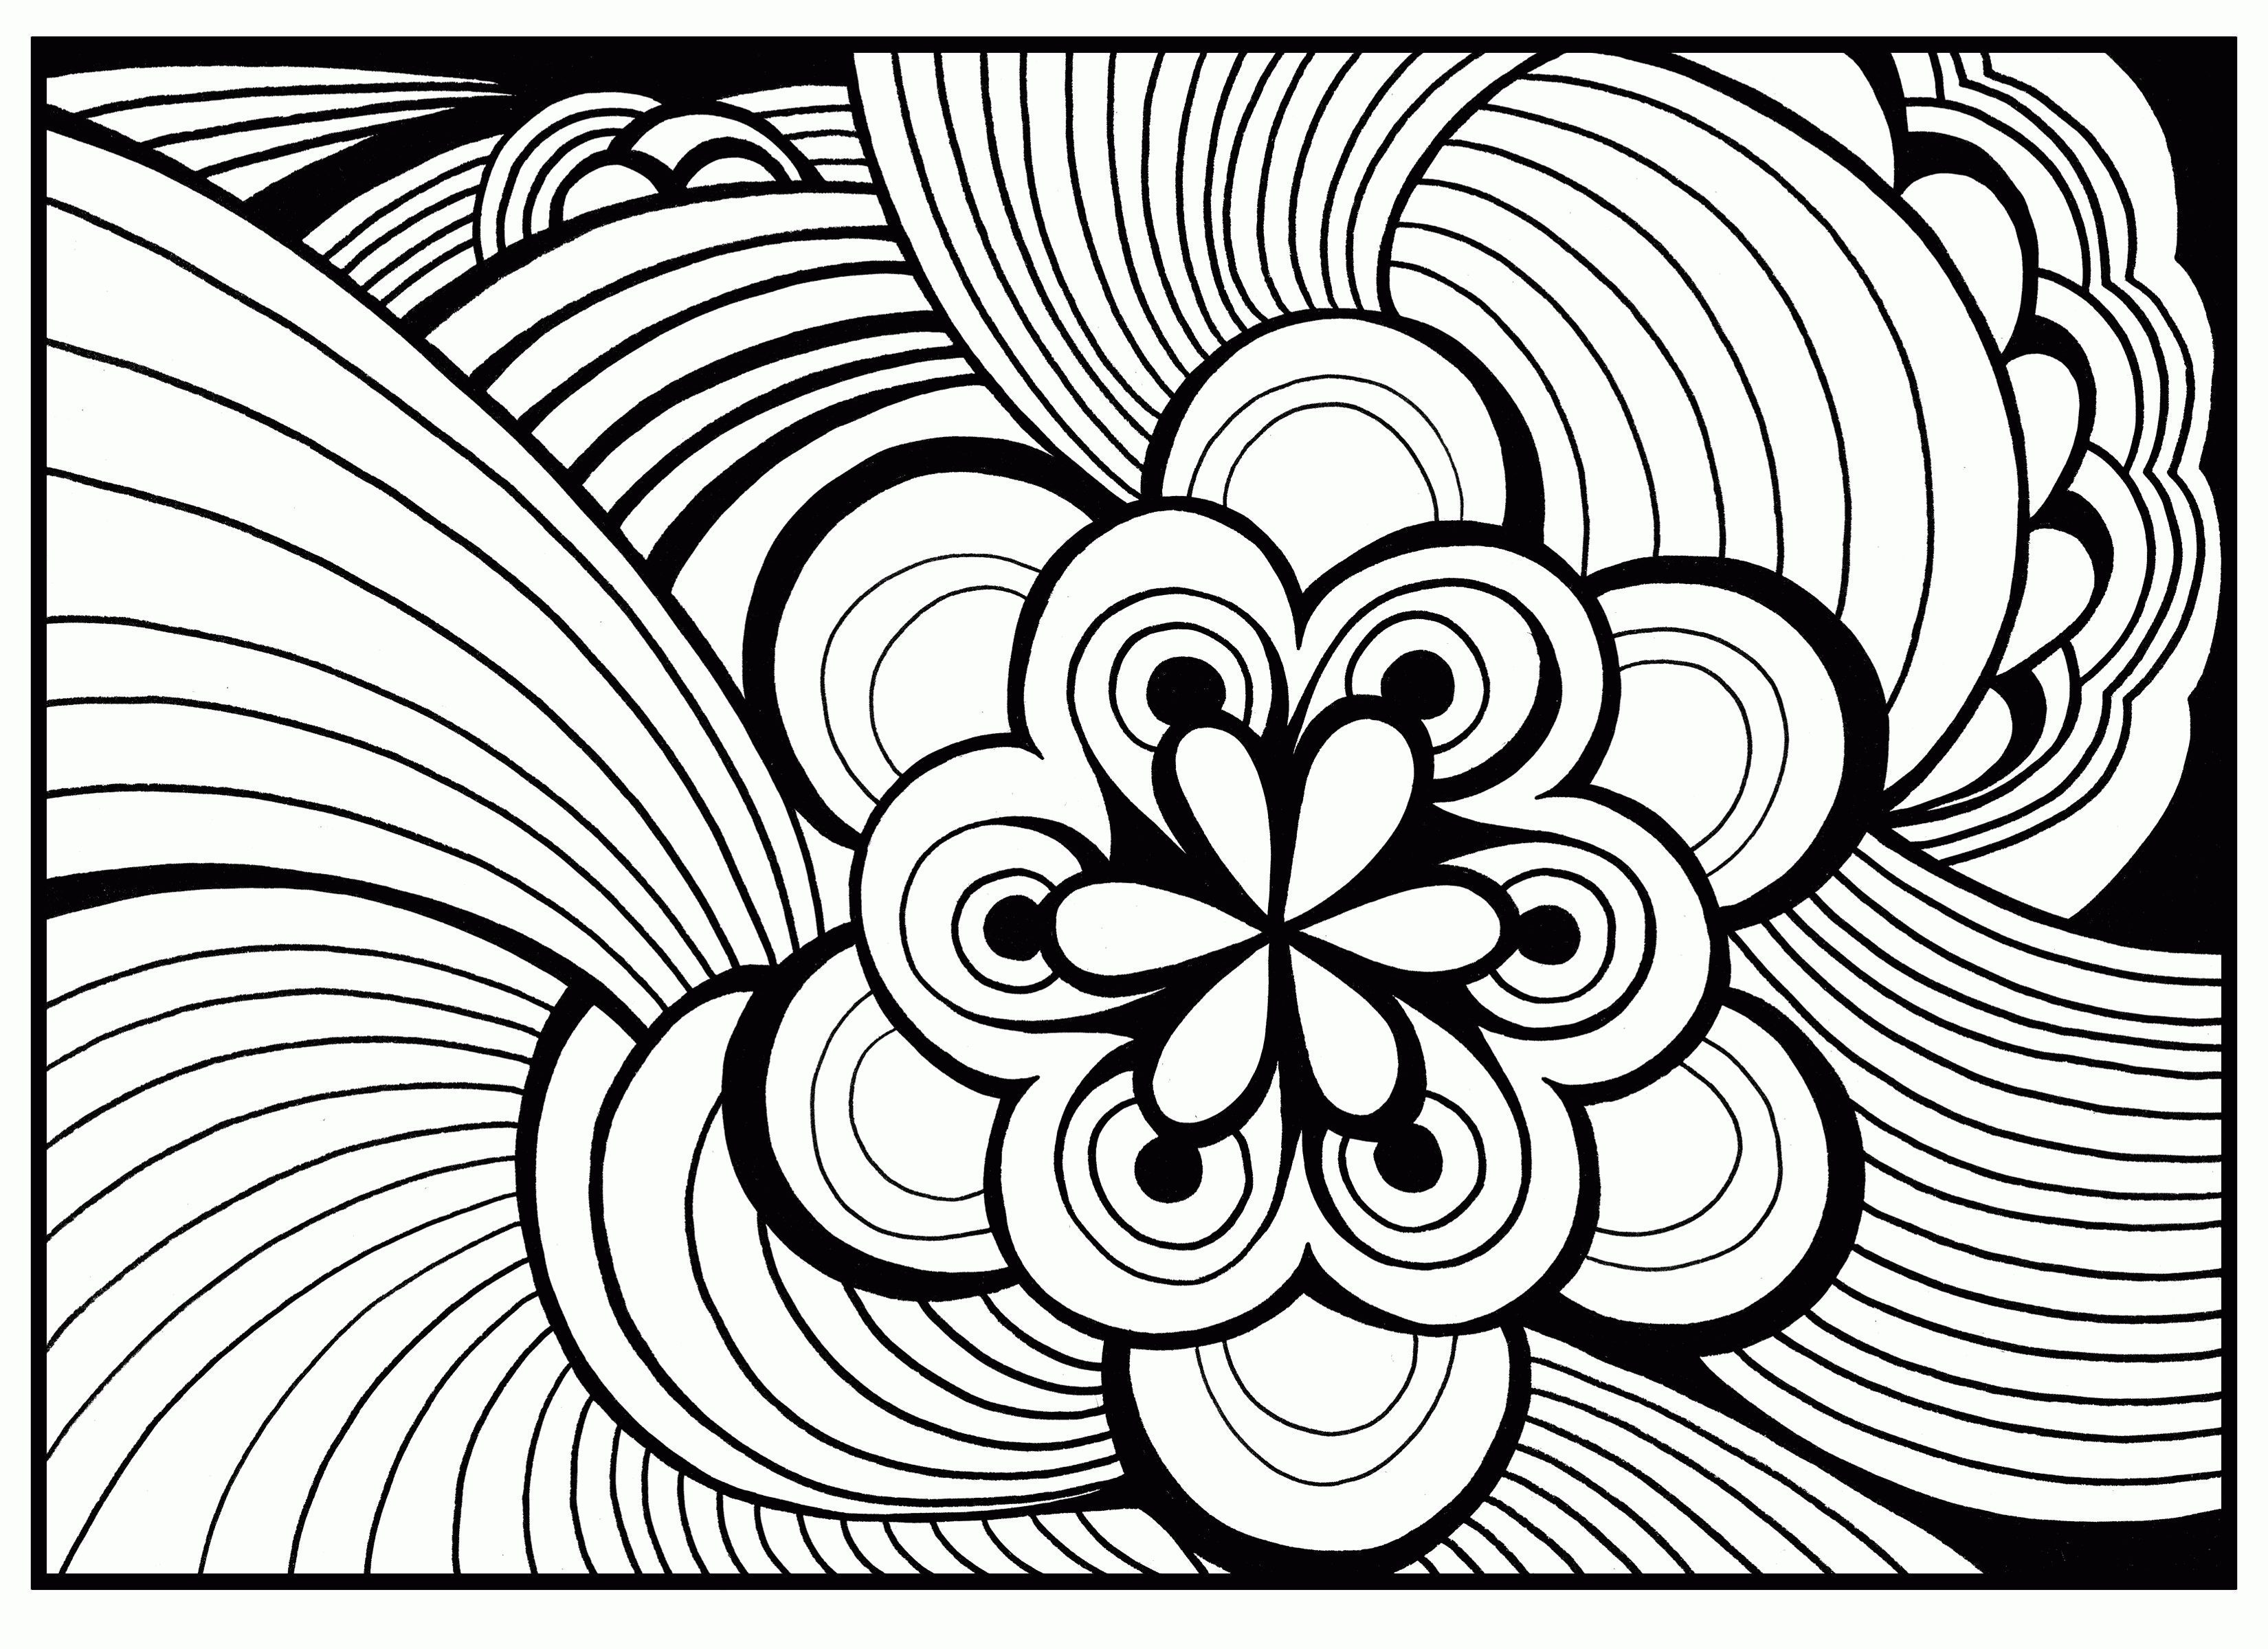 Cool Colouring Pages - Coloring Pages for Kids and for Adults